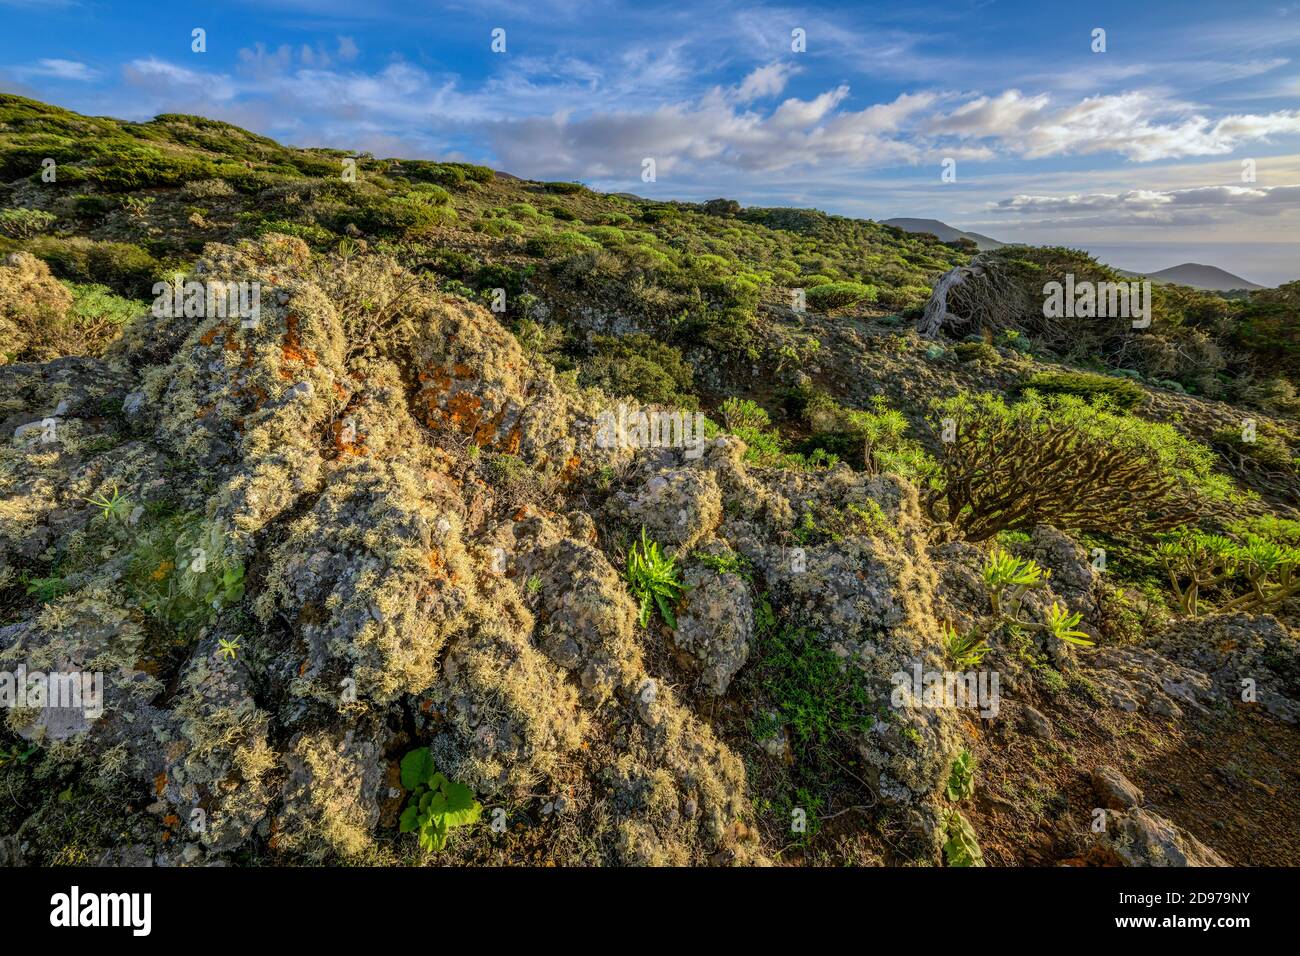 Lichen-covered rocks at El Sabinar, on the island of El Herrio in the Canaries. Moor continuously beaten by the humid trade winds and classified for i Stock Photo